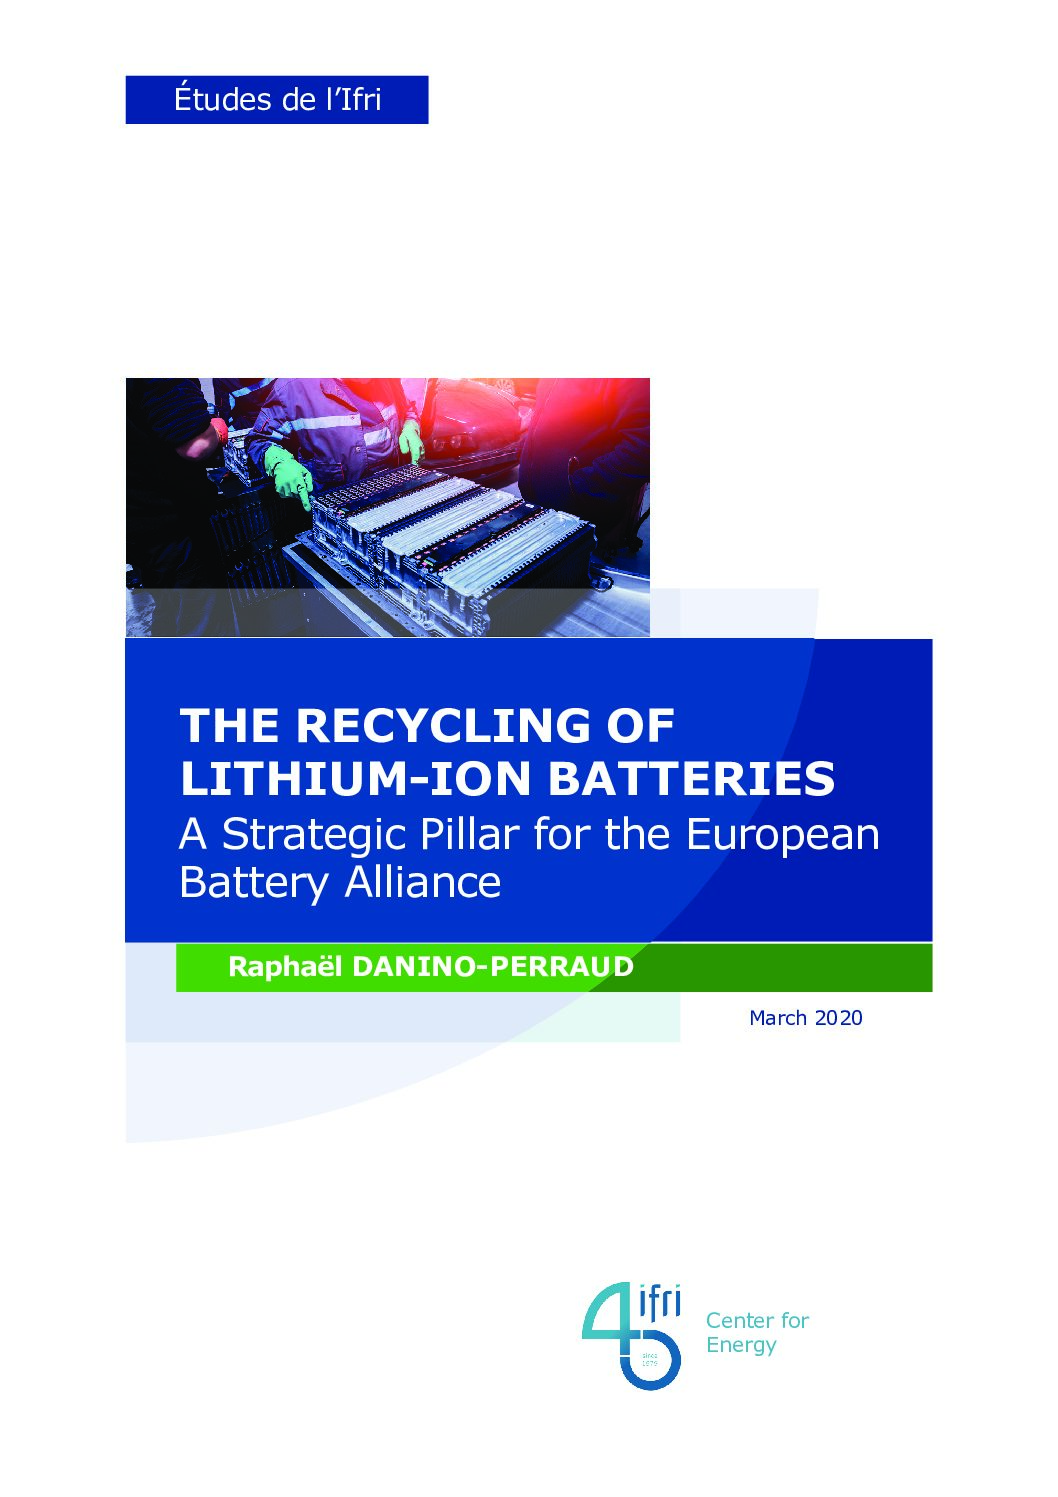 The Recycling of Lithium-Ion Batteries